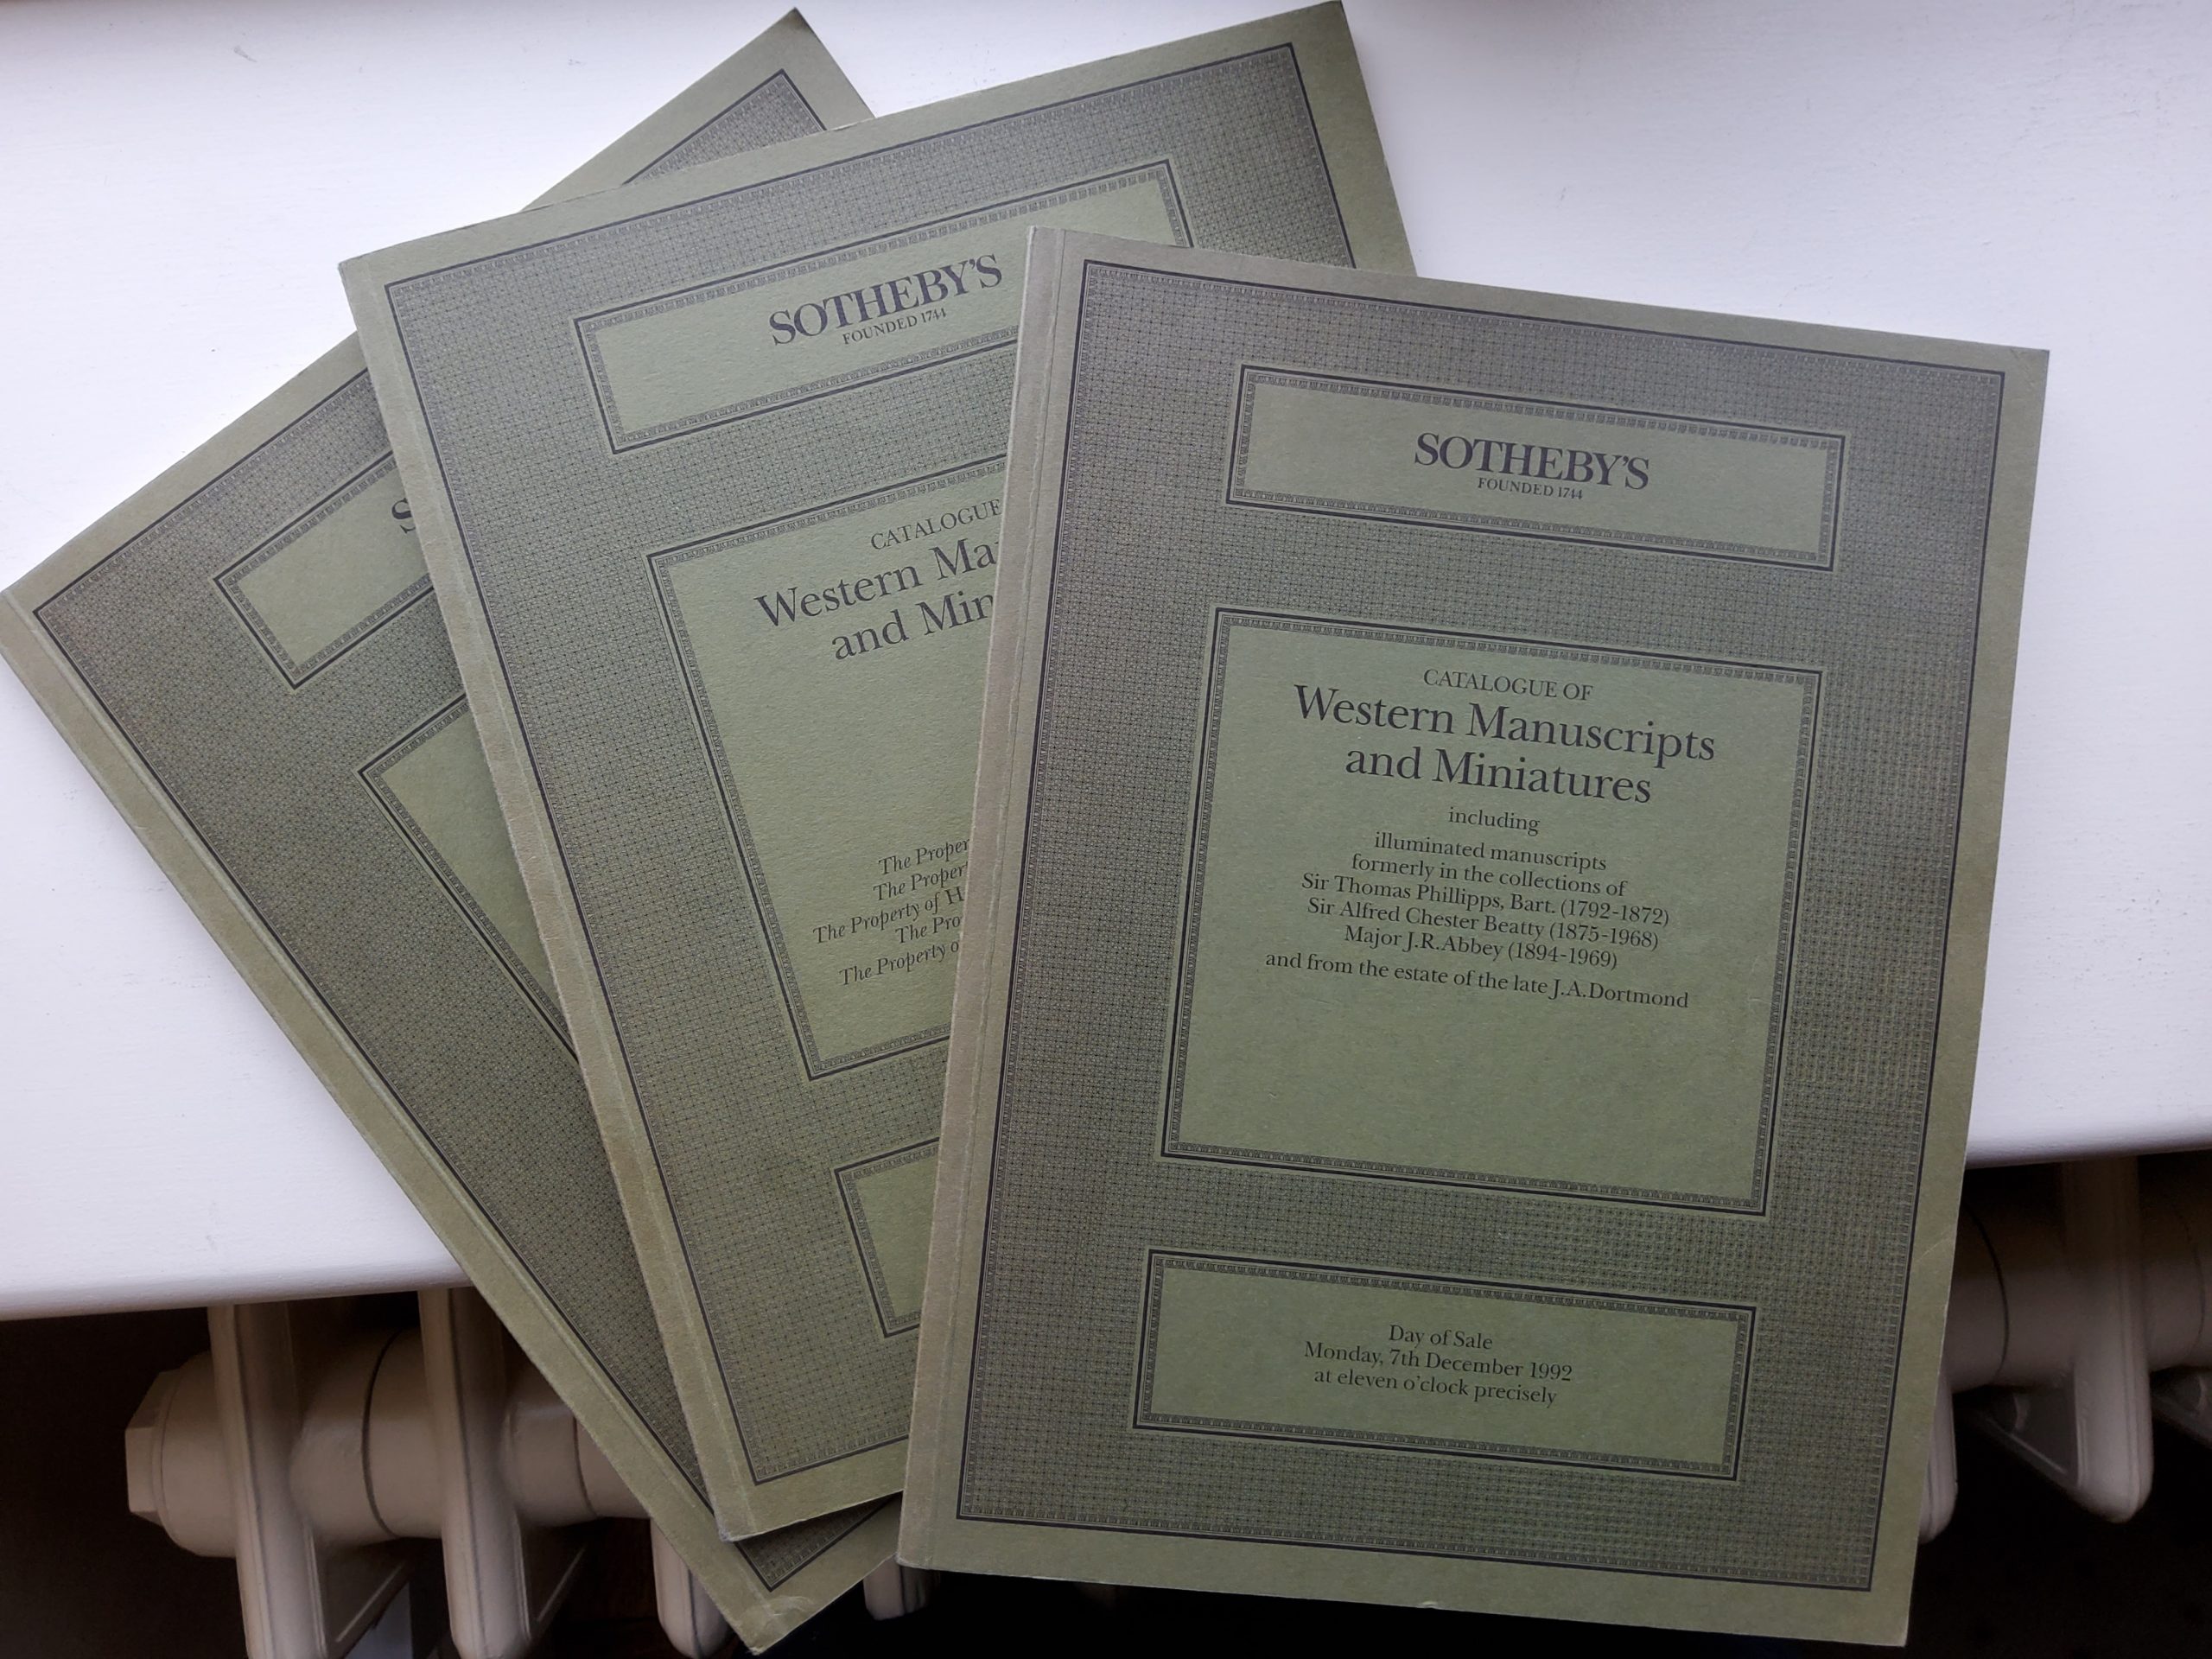 Sotheby’s Catalogues of Western Manuscripts and Miniatures; 3 vols